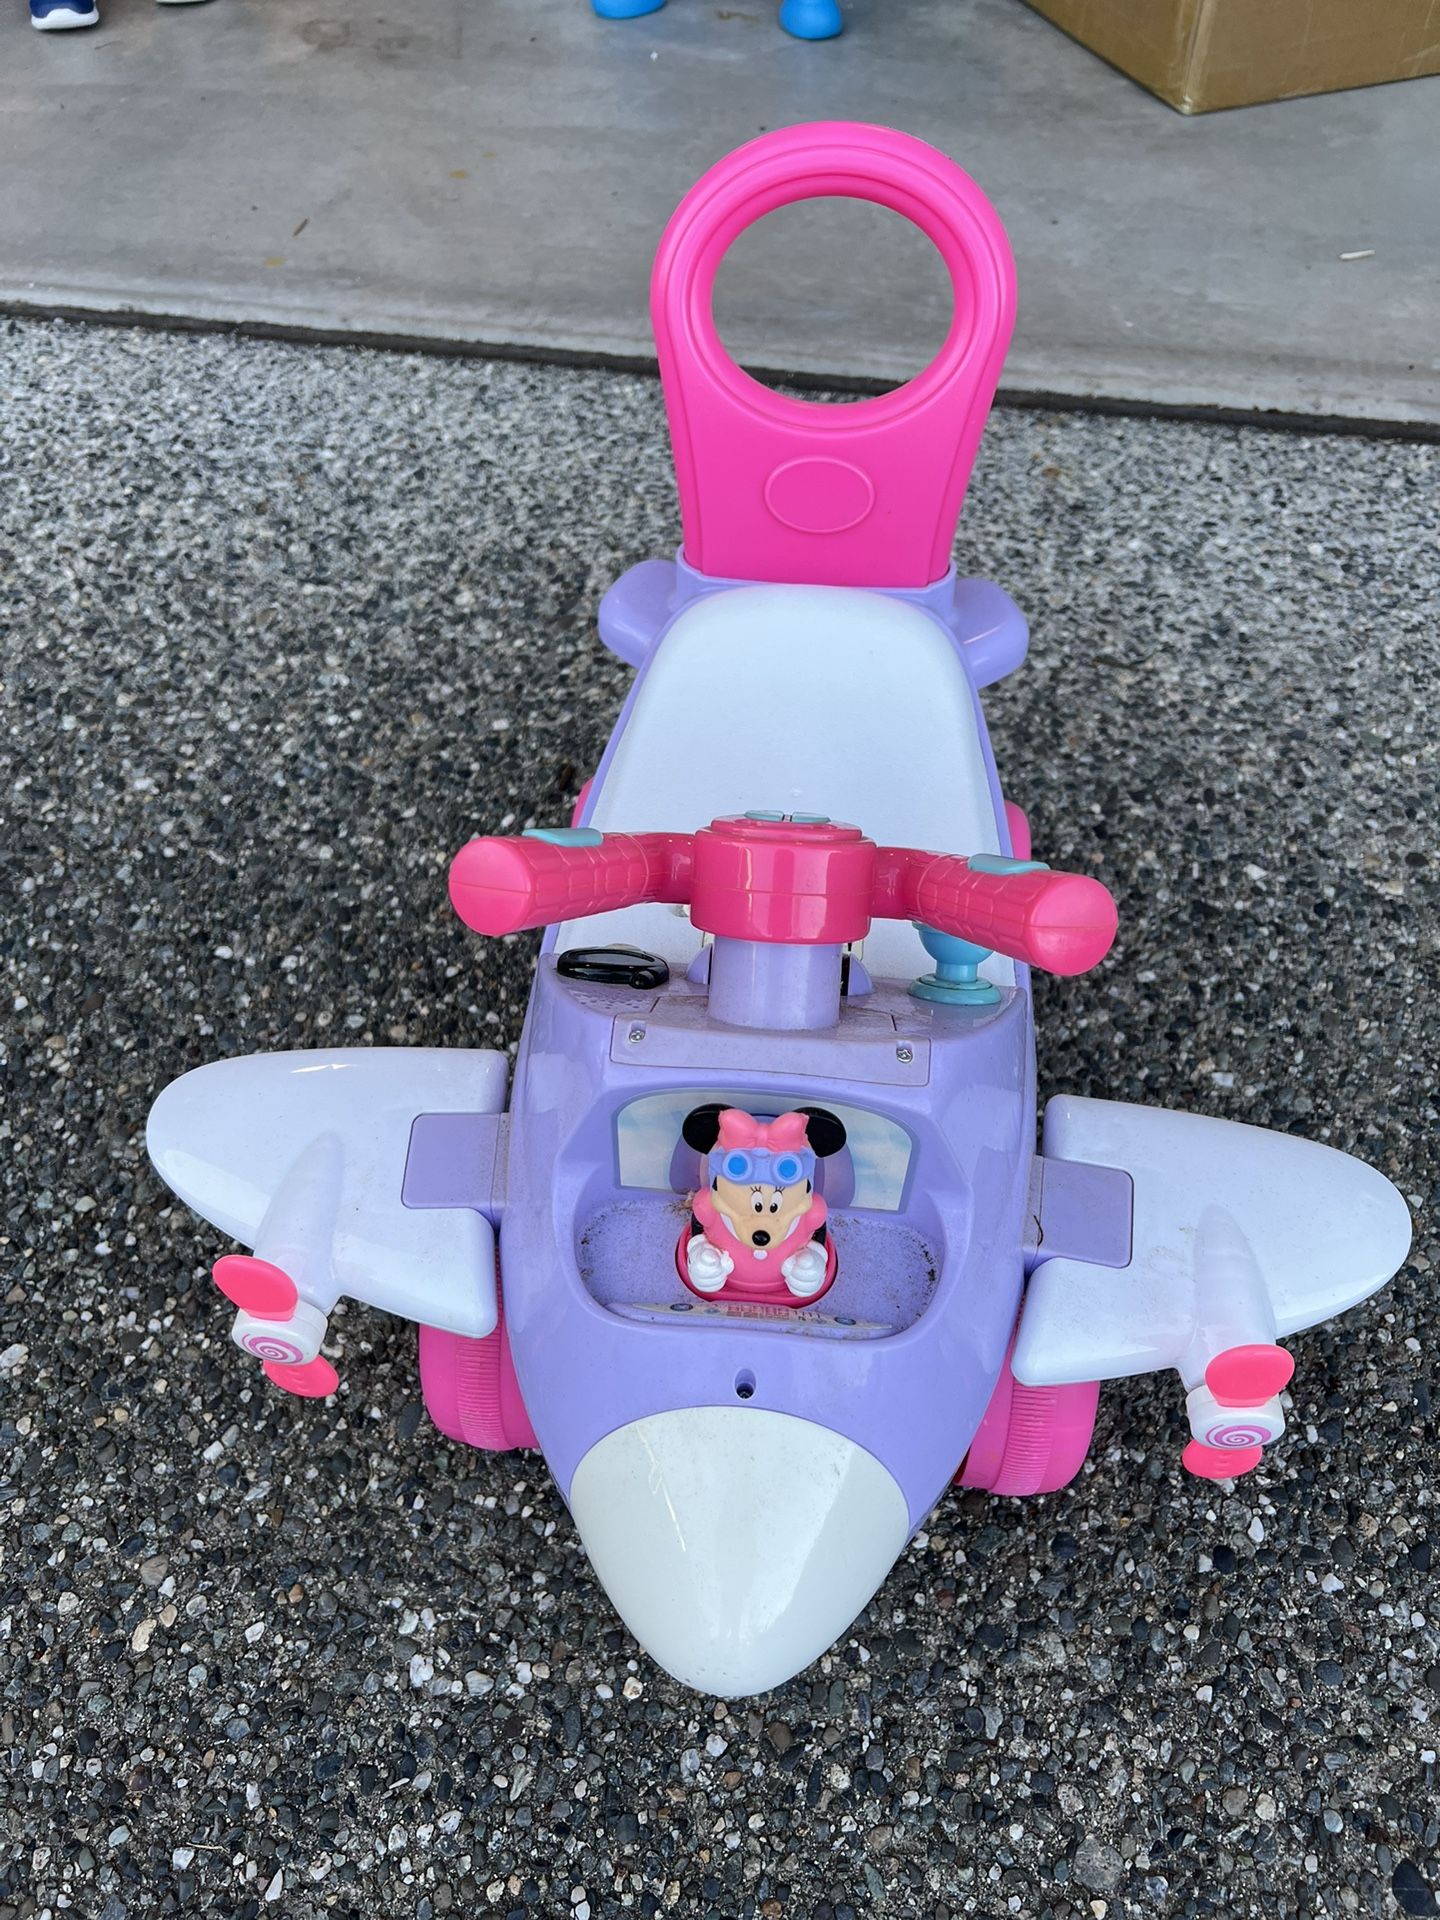 Kids Plane Rider For 1year Old